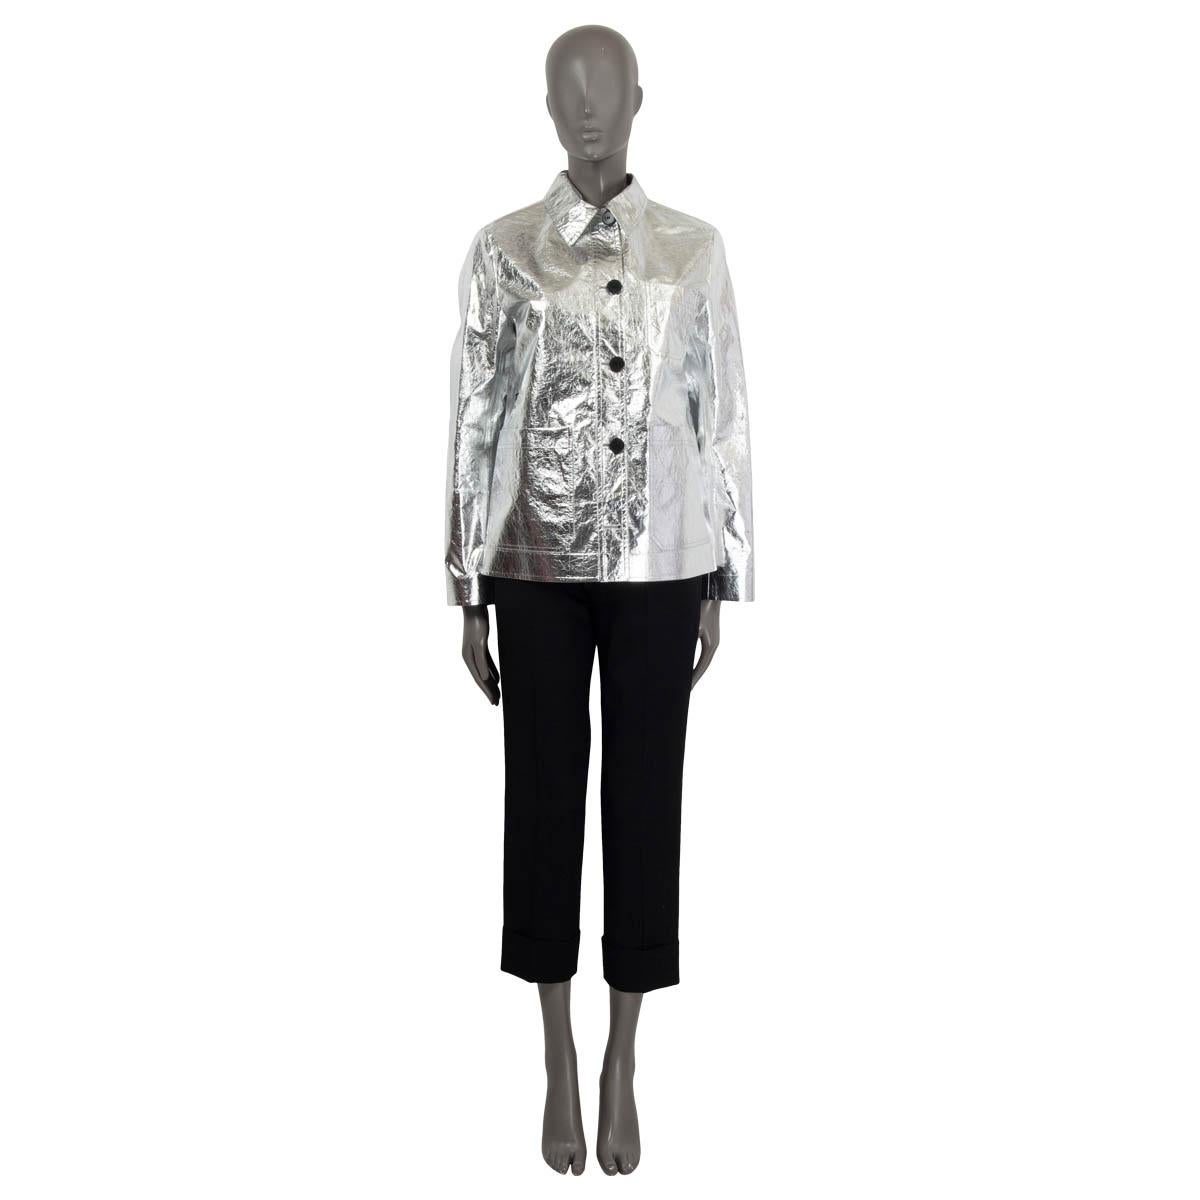 100% authentic Christian Dior Pre-Fall 2021 'Caro' crinkled jacket in metallic silver polyester (100%). Features three patch pockets on the front and long sleeves. Opens with five buttons on the front. Unlined. Has been worn once and is in virtually